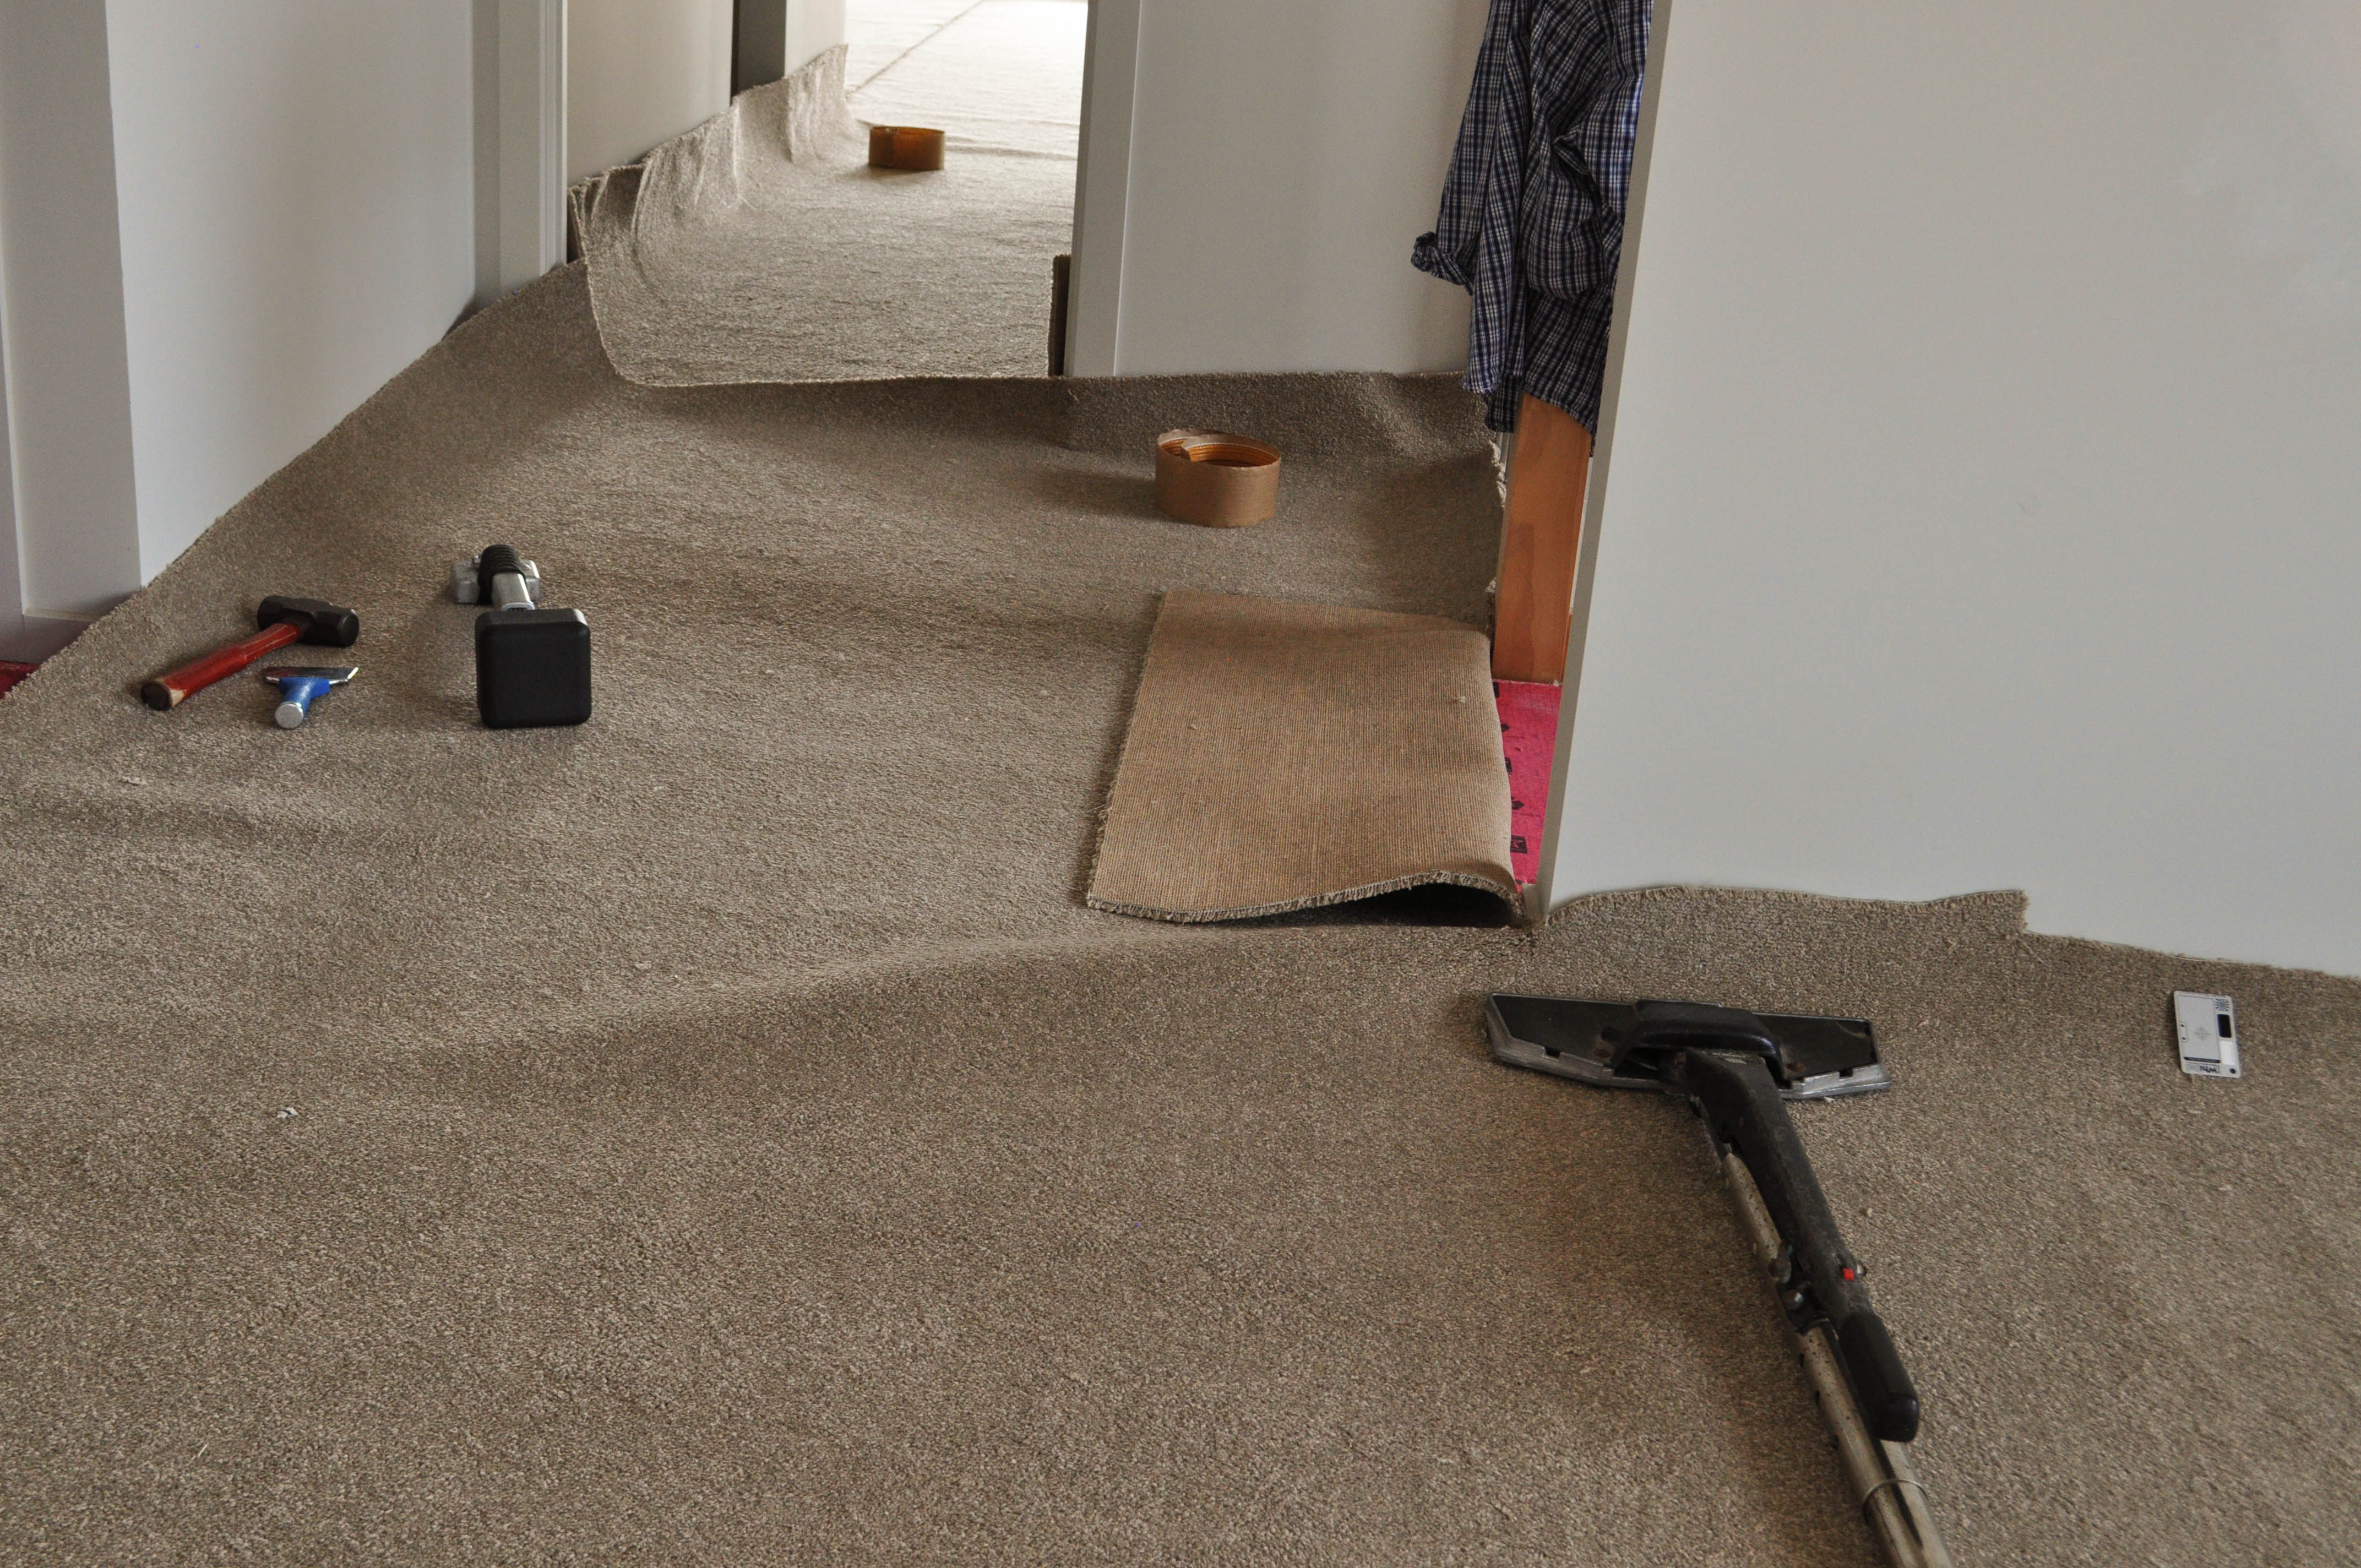 a slab of carpet with ripples in it, in a room that has been lifted of the gripper and where the telescopic head of the power stretcher
has been applied against the carpet gripping it and stretching it.